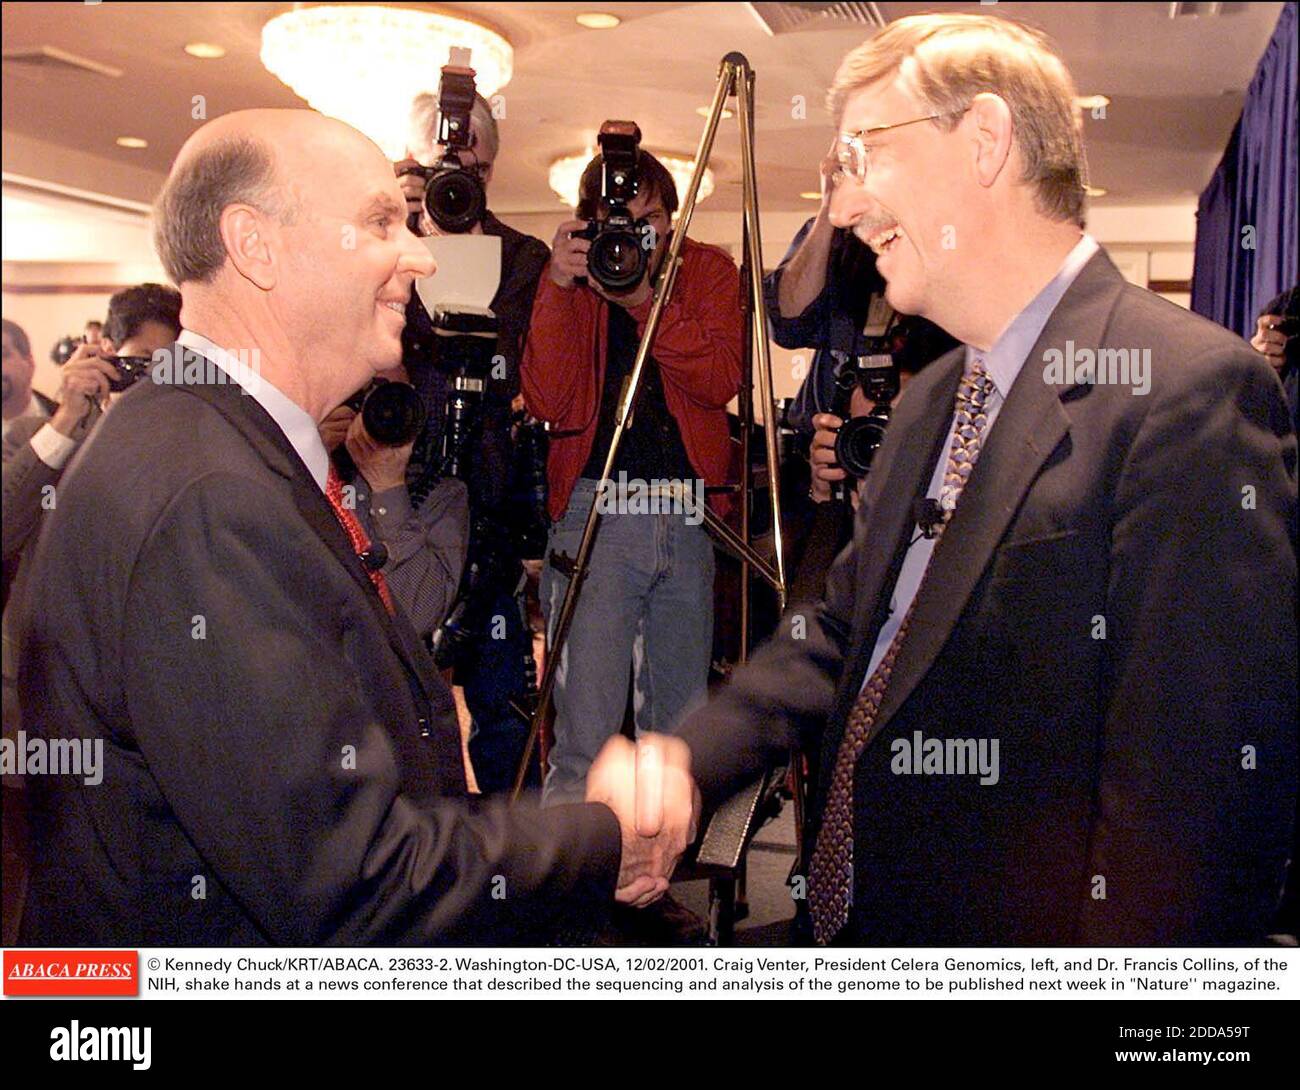 NO FILM, NO VIDEO, NO TV, NO DOCUMENTARY - © Kennedy Chuck/KRT/Abaca. 23633-2. Washington-DC-USA, 12/02/2001. Craig Venter, President Celera Genomics, left, and Dr. Francis Collins, of the NIH, shake hands at a news conference that described the sequencing and analysis of the genome to be publishe Stock Photo